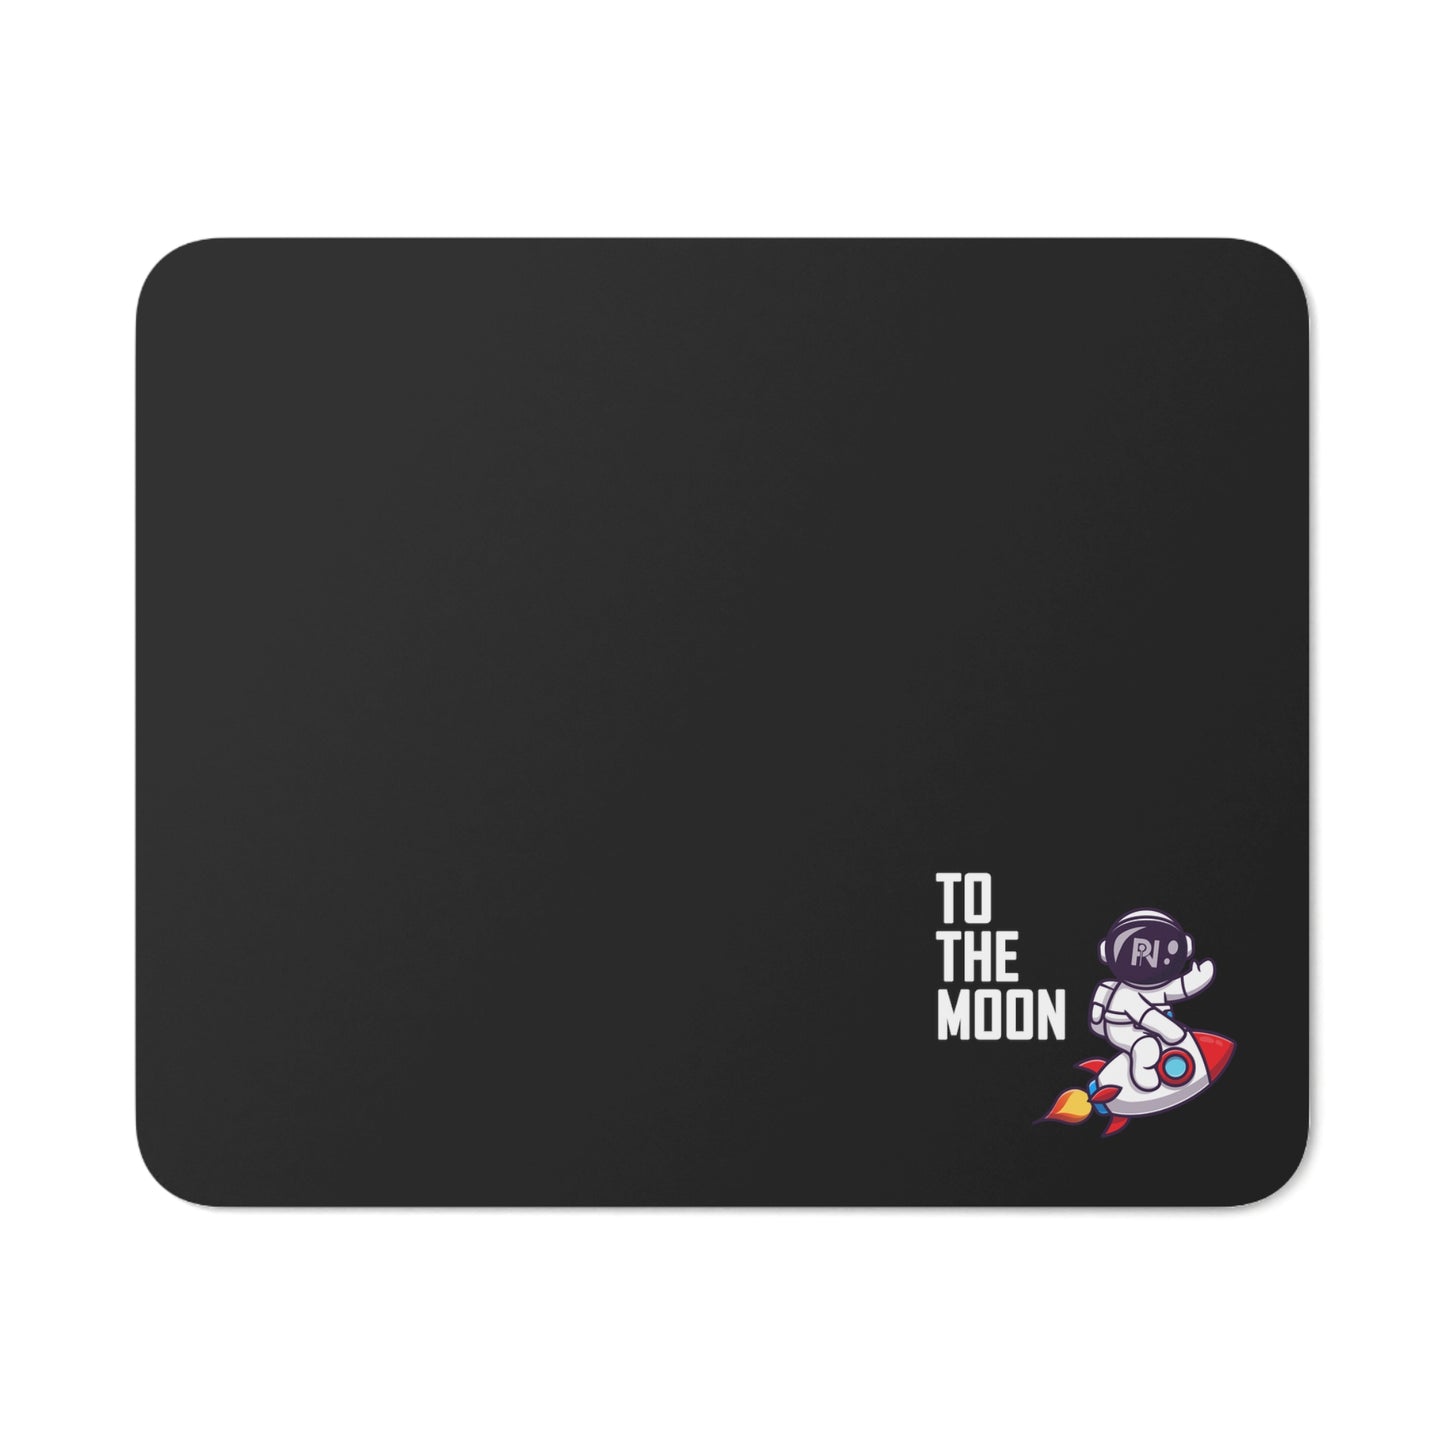 Desk Mouse Pad (To the moon)